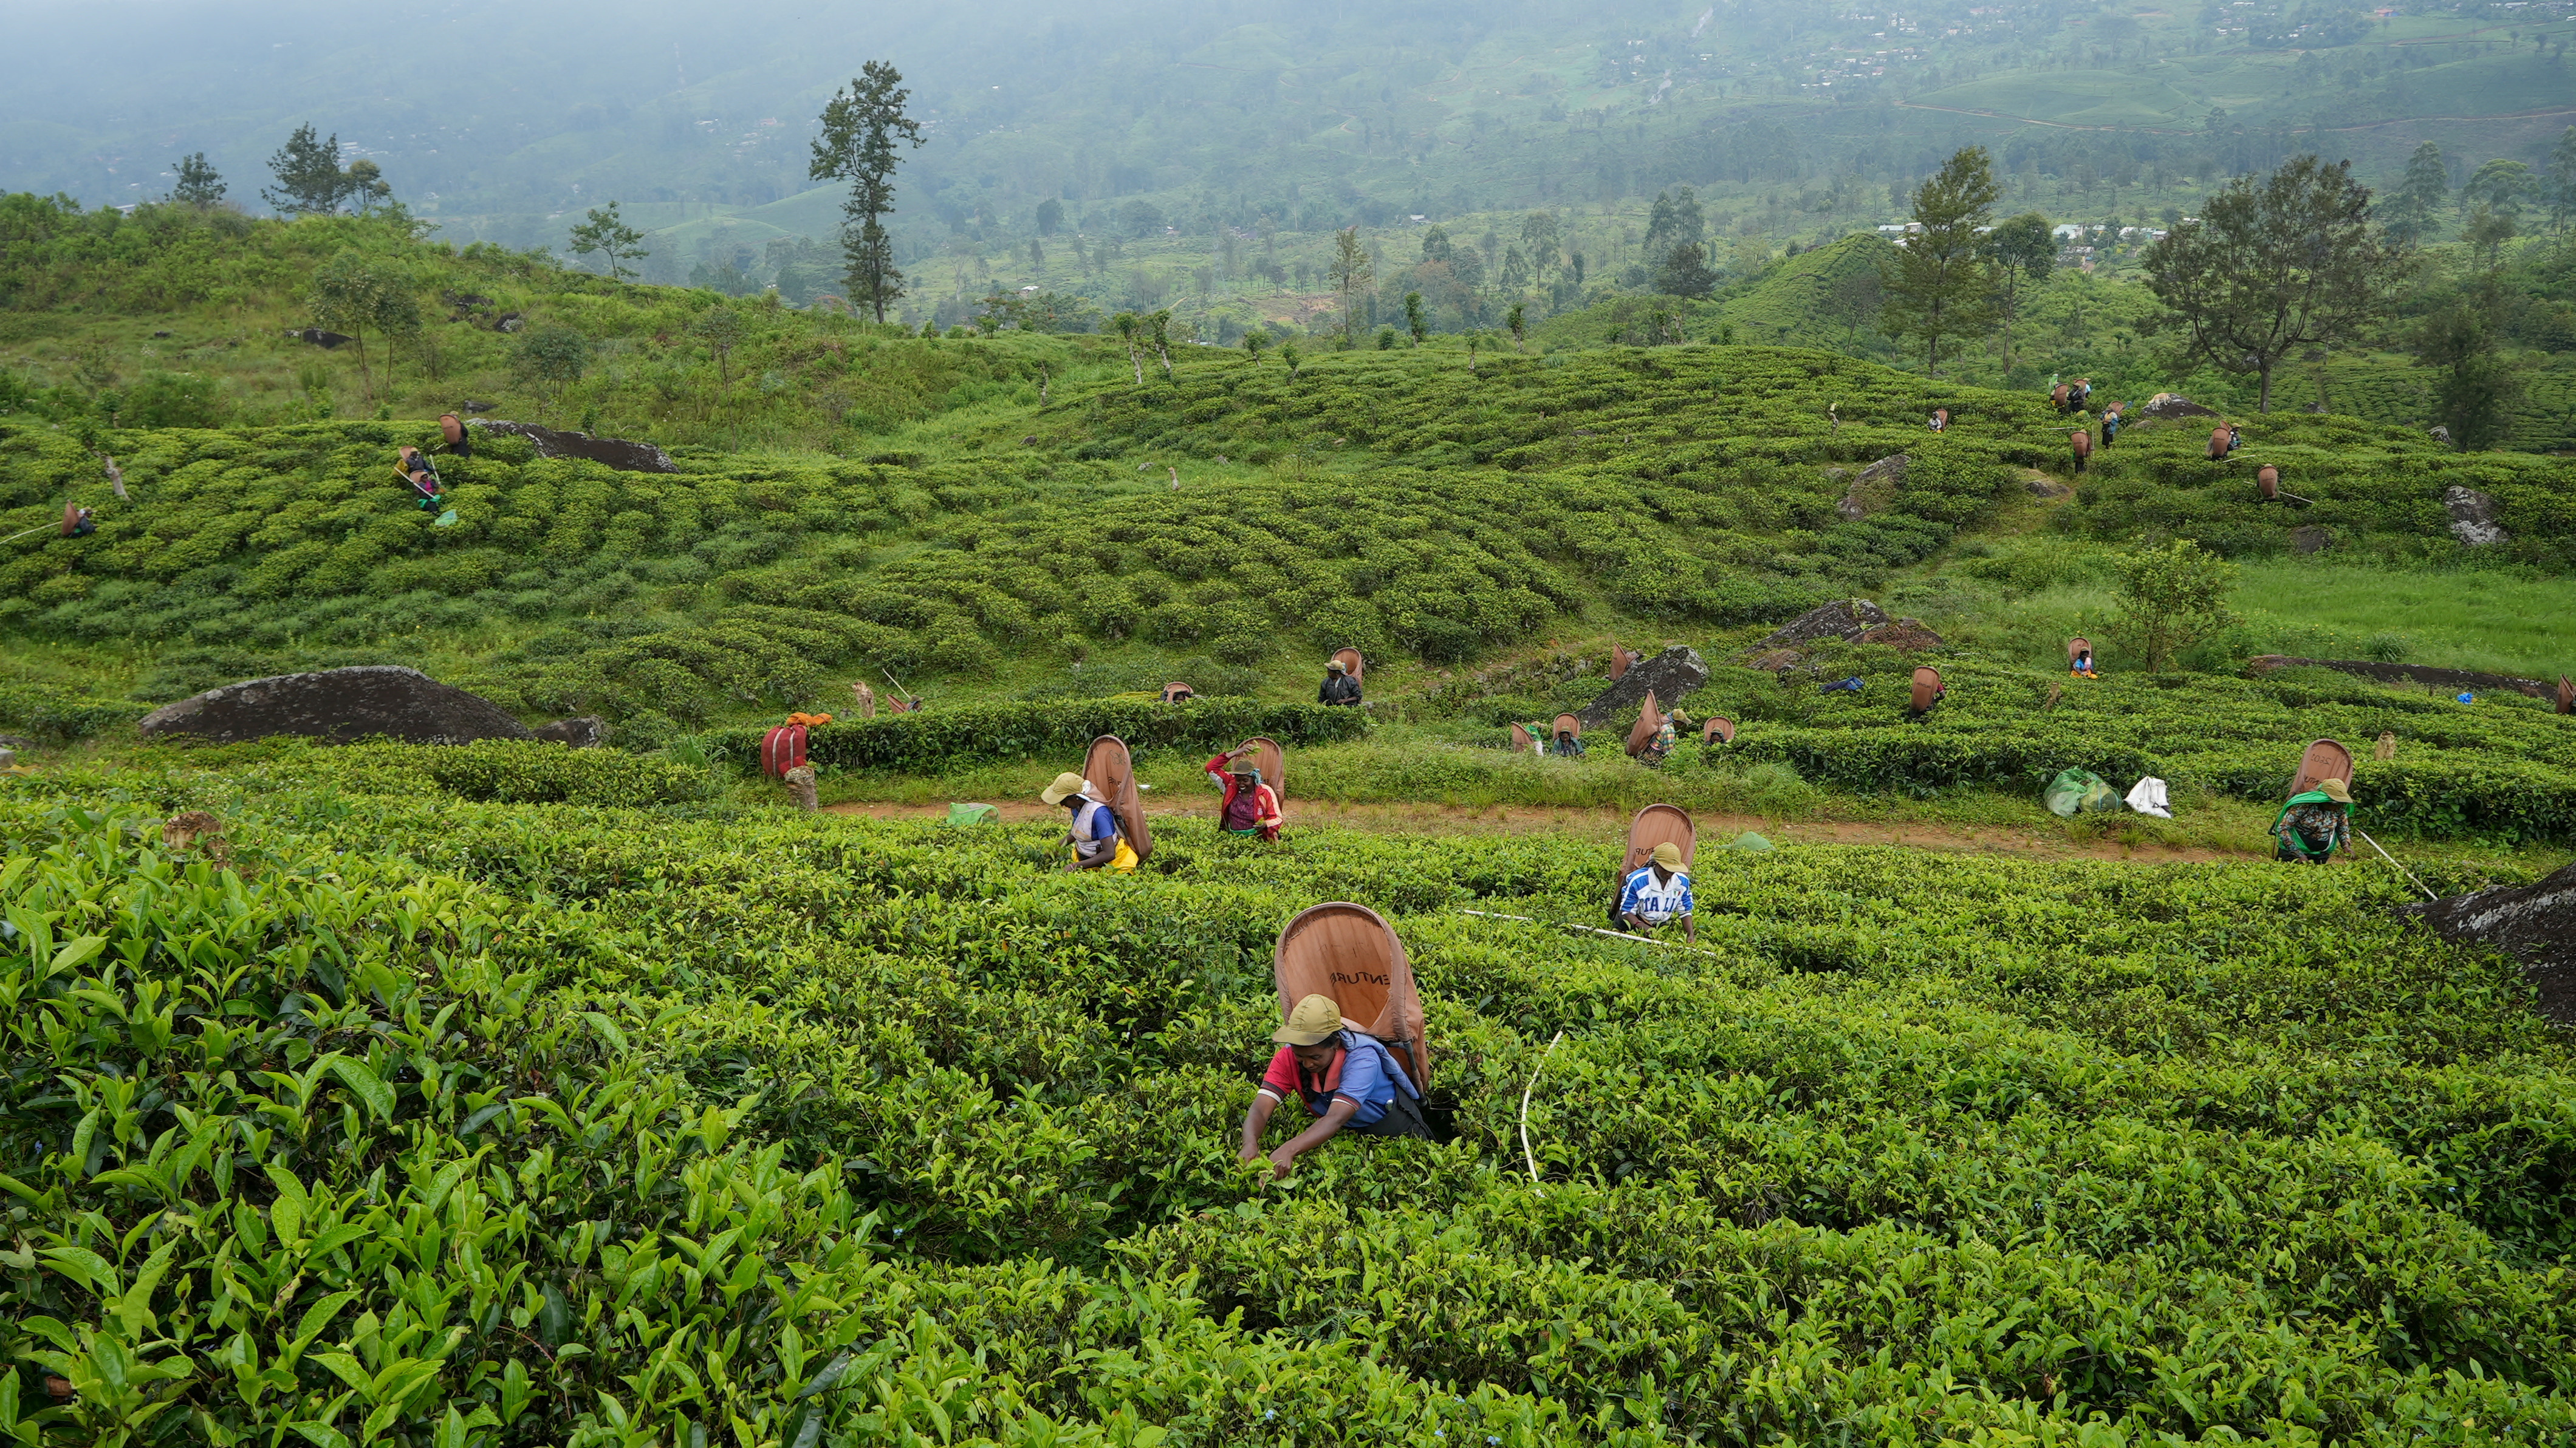 Tea pickers pluck tea leaves at a plantation in the morning in Norwood